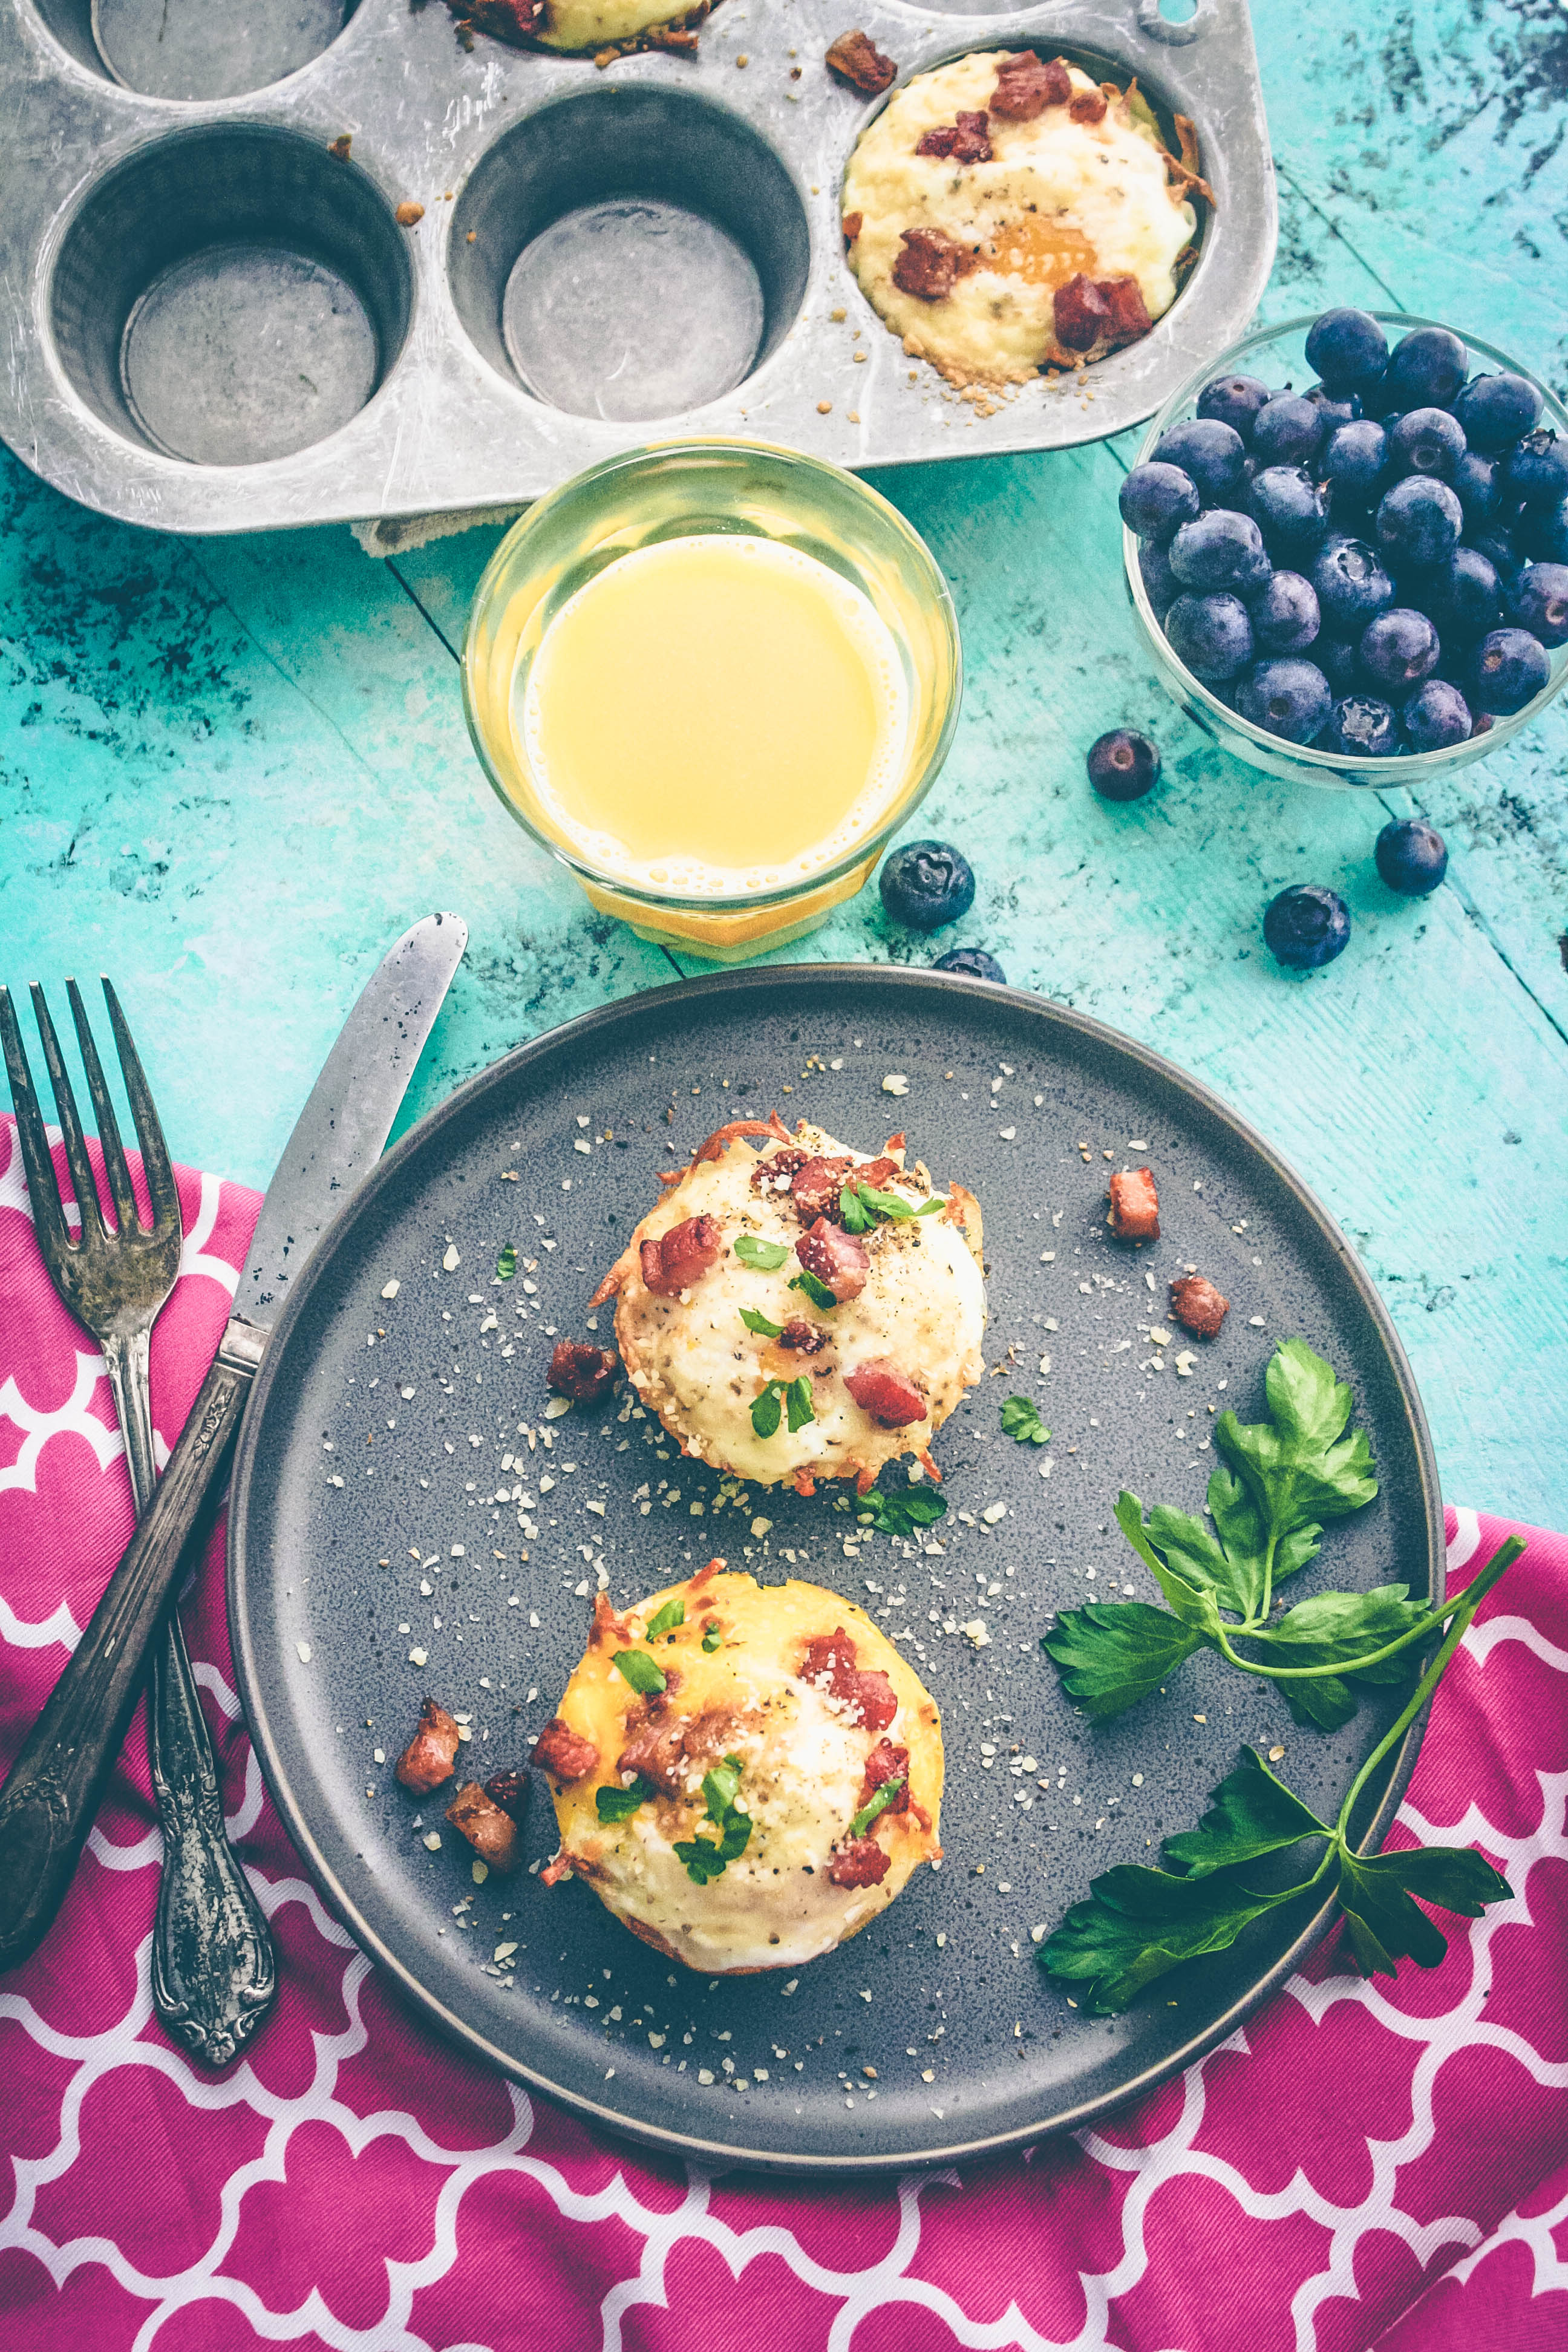 Baked Hash Brown Egg Cups with Parmesan and Pancetta make a great breakfast dish. Baked Hash Brown Egg Cups with Parmesan and Pancetta are wonderful for breakfast!